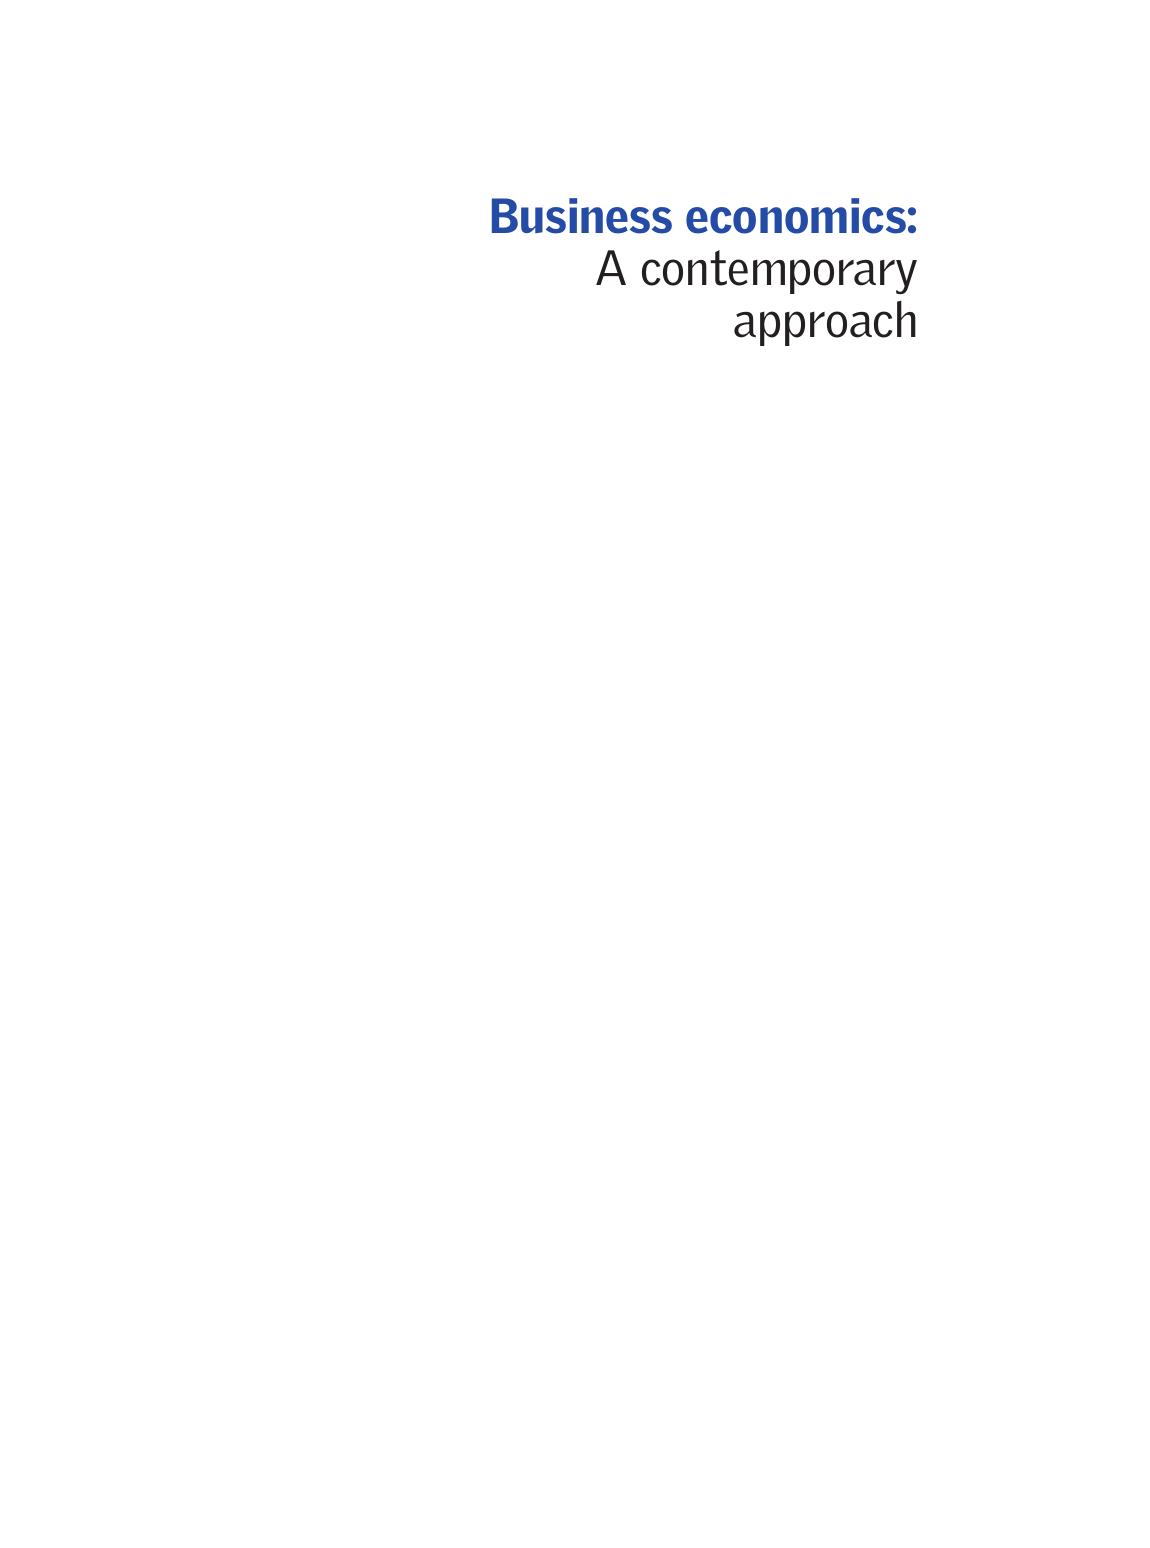 Business Economics A Contemporary Approach by Peter E. Earl, Tim Wakeley 2005